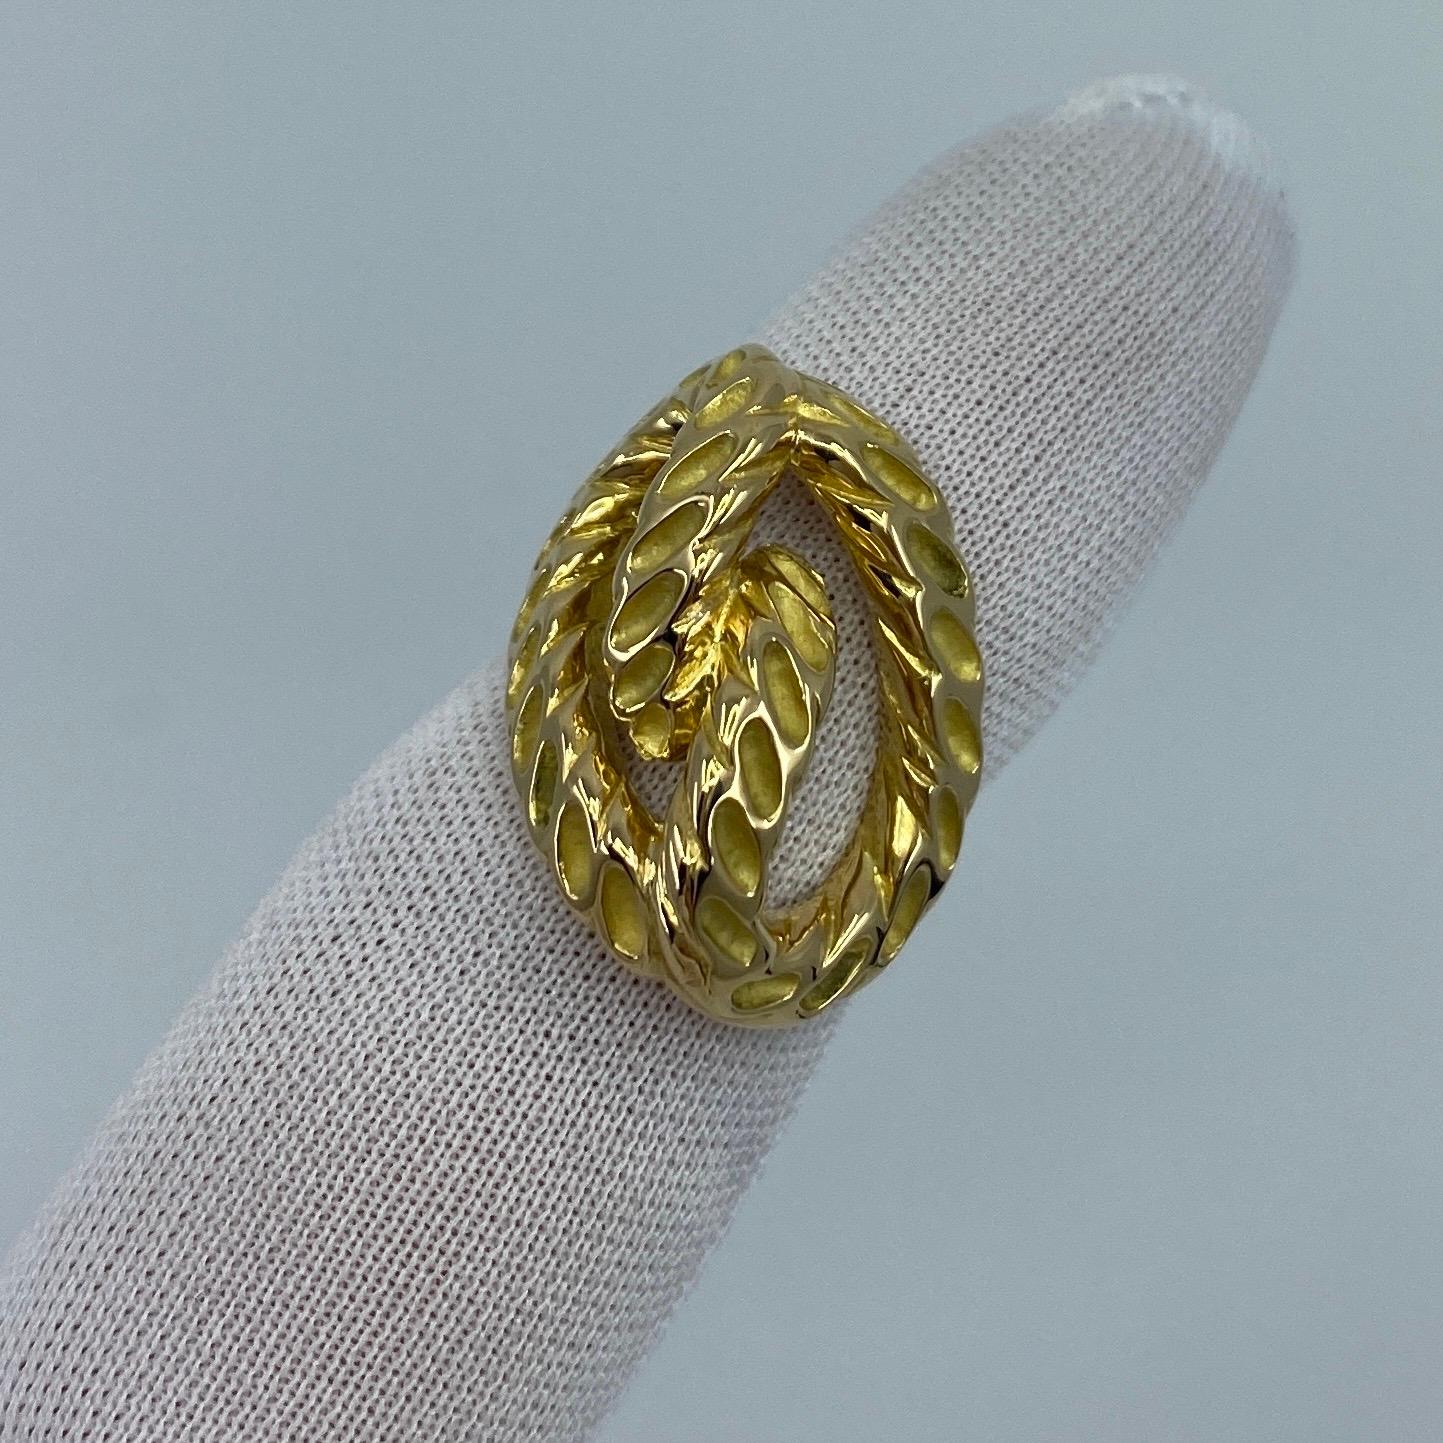 Rare Vintage Van Cleef & Arpels 18k Yellow Gold Braid Rope Motif Ring with Box For Sale 7